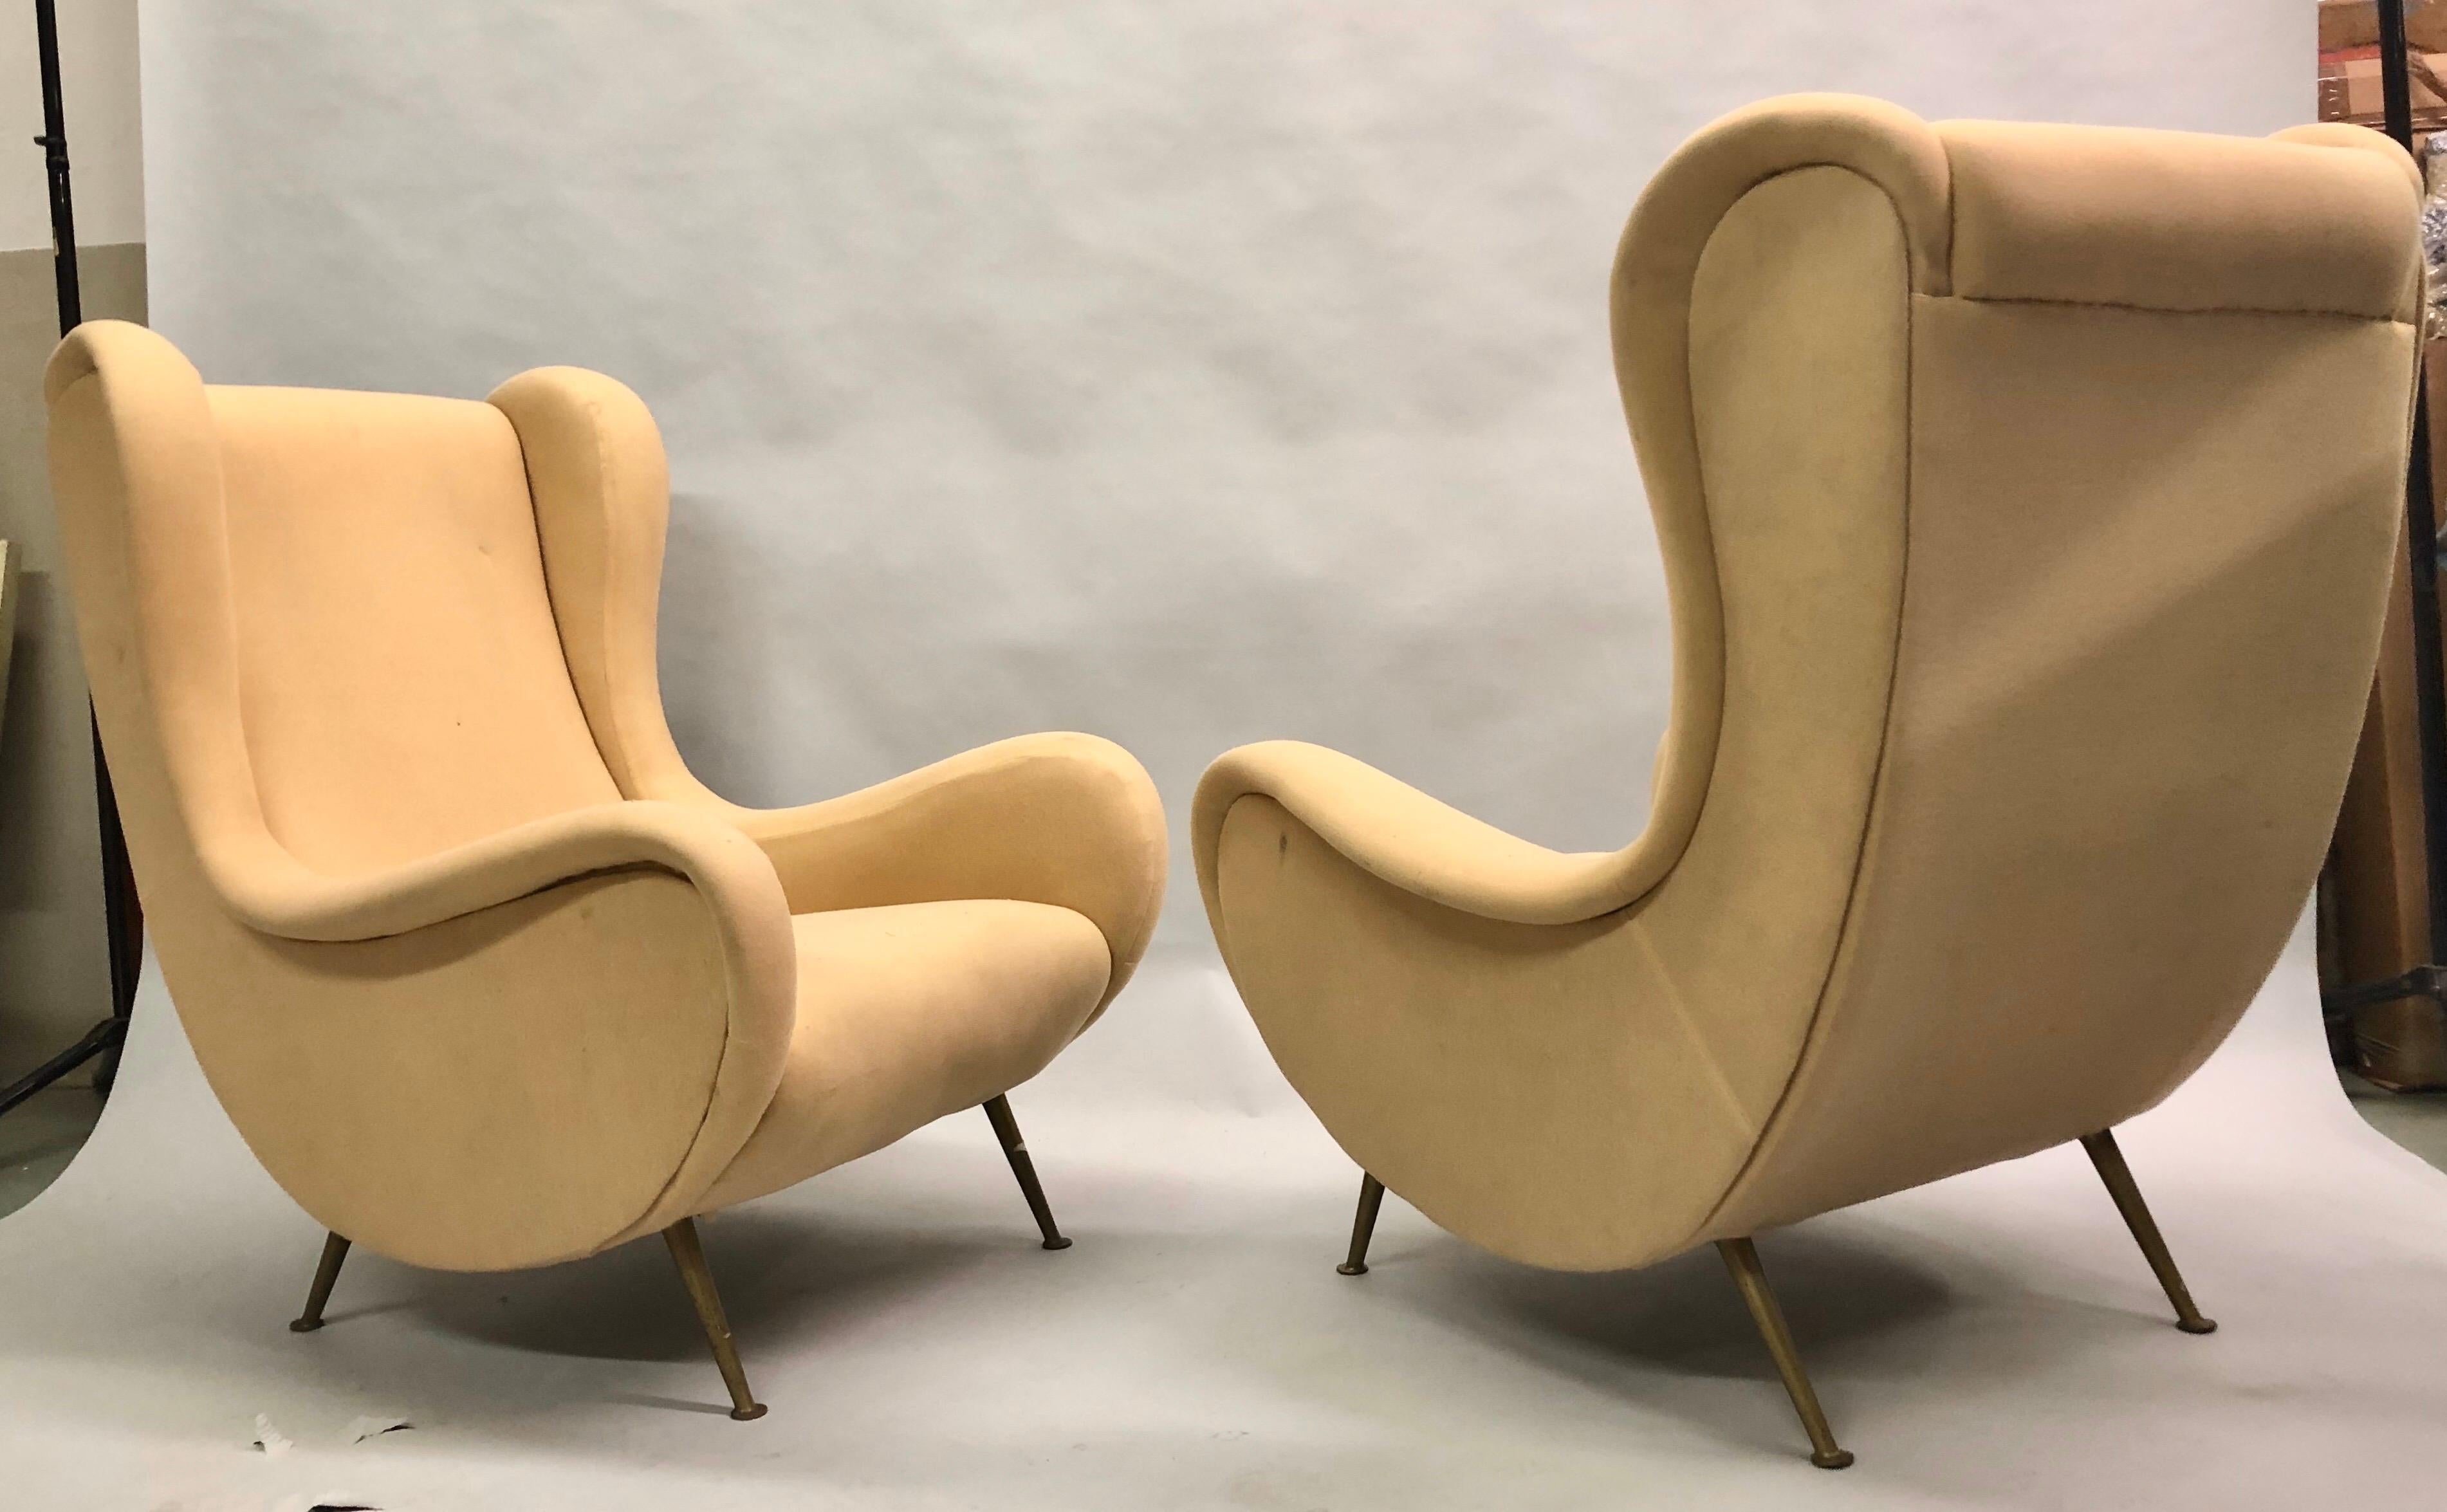 Mid-Century Modern Vintage Pair of Italian 'Senior Chairs' / Lounge Chairs, Marco Zanuso Style For Sale